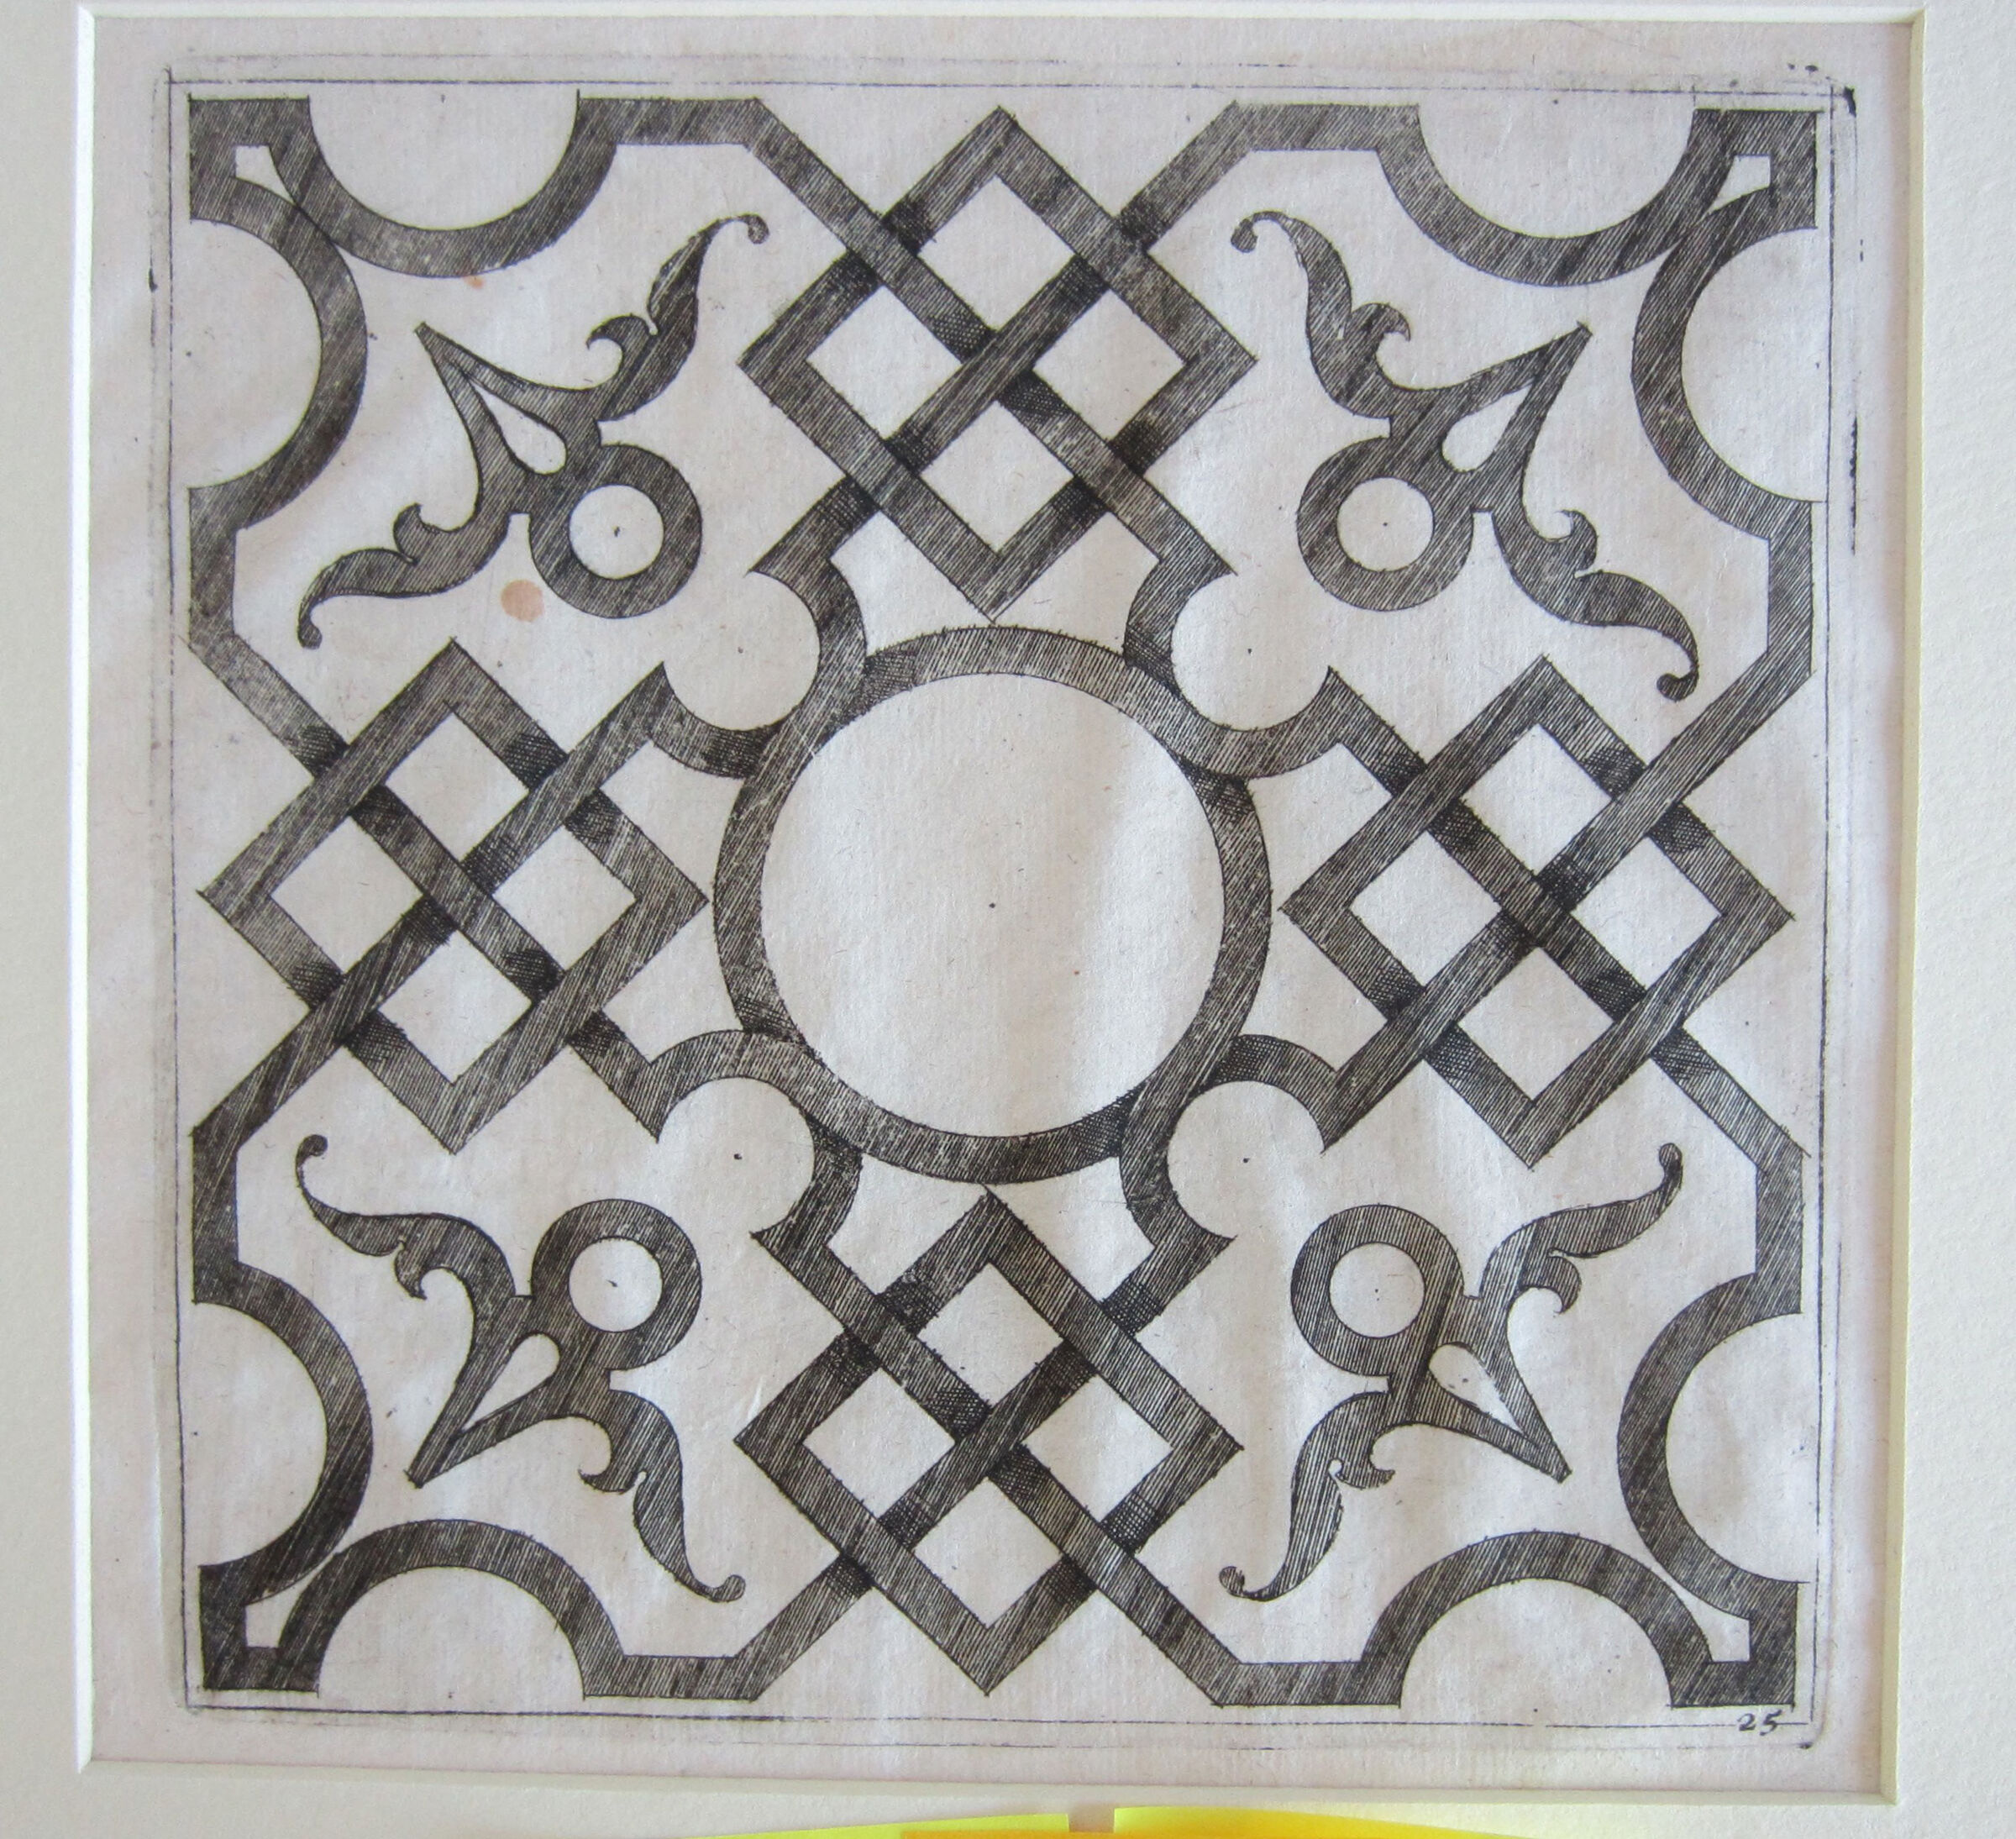 Interlace Centered By A Circle, Four Smaller Circles With Scrolling Ornament Floating In The Corners